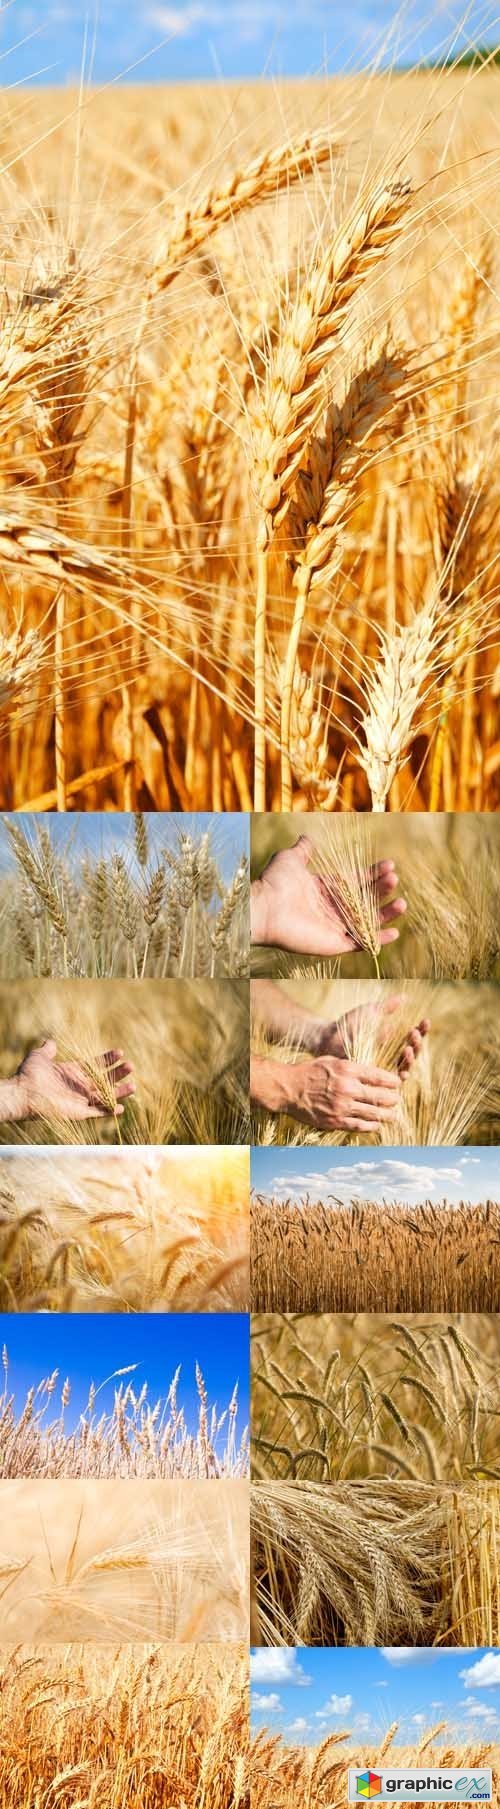 Photo Set - Ears of golden wheat close up, harvest Concept